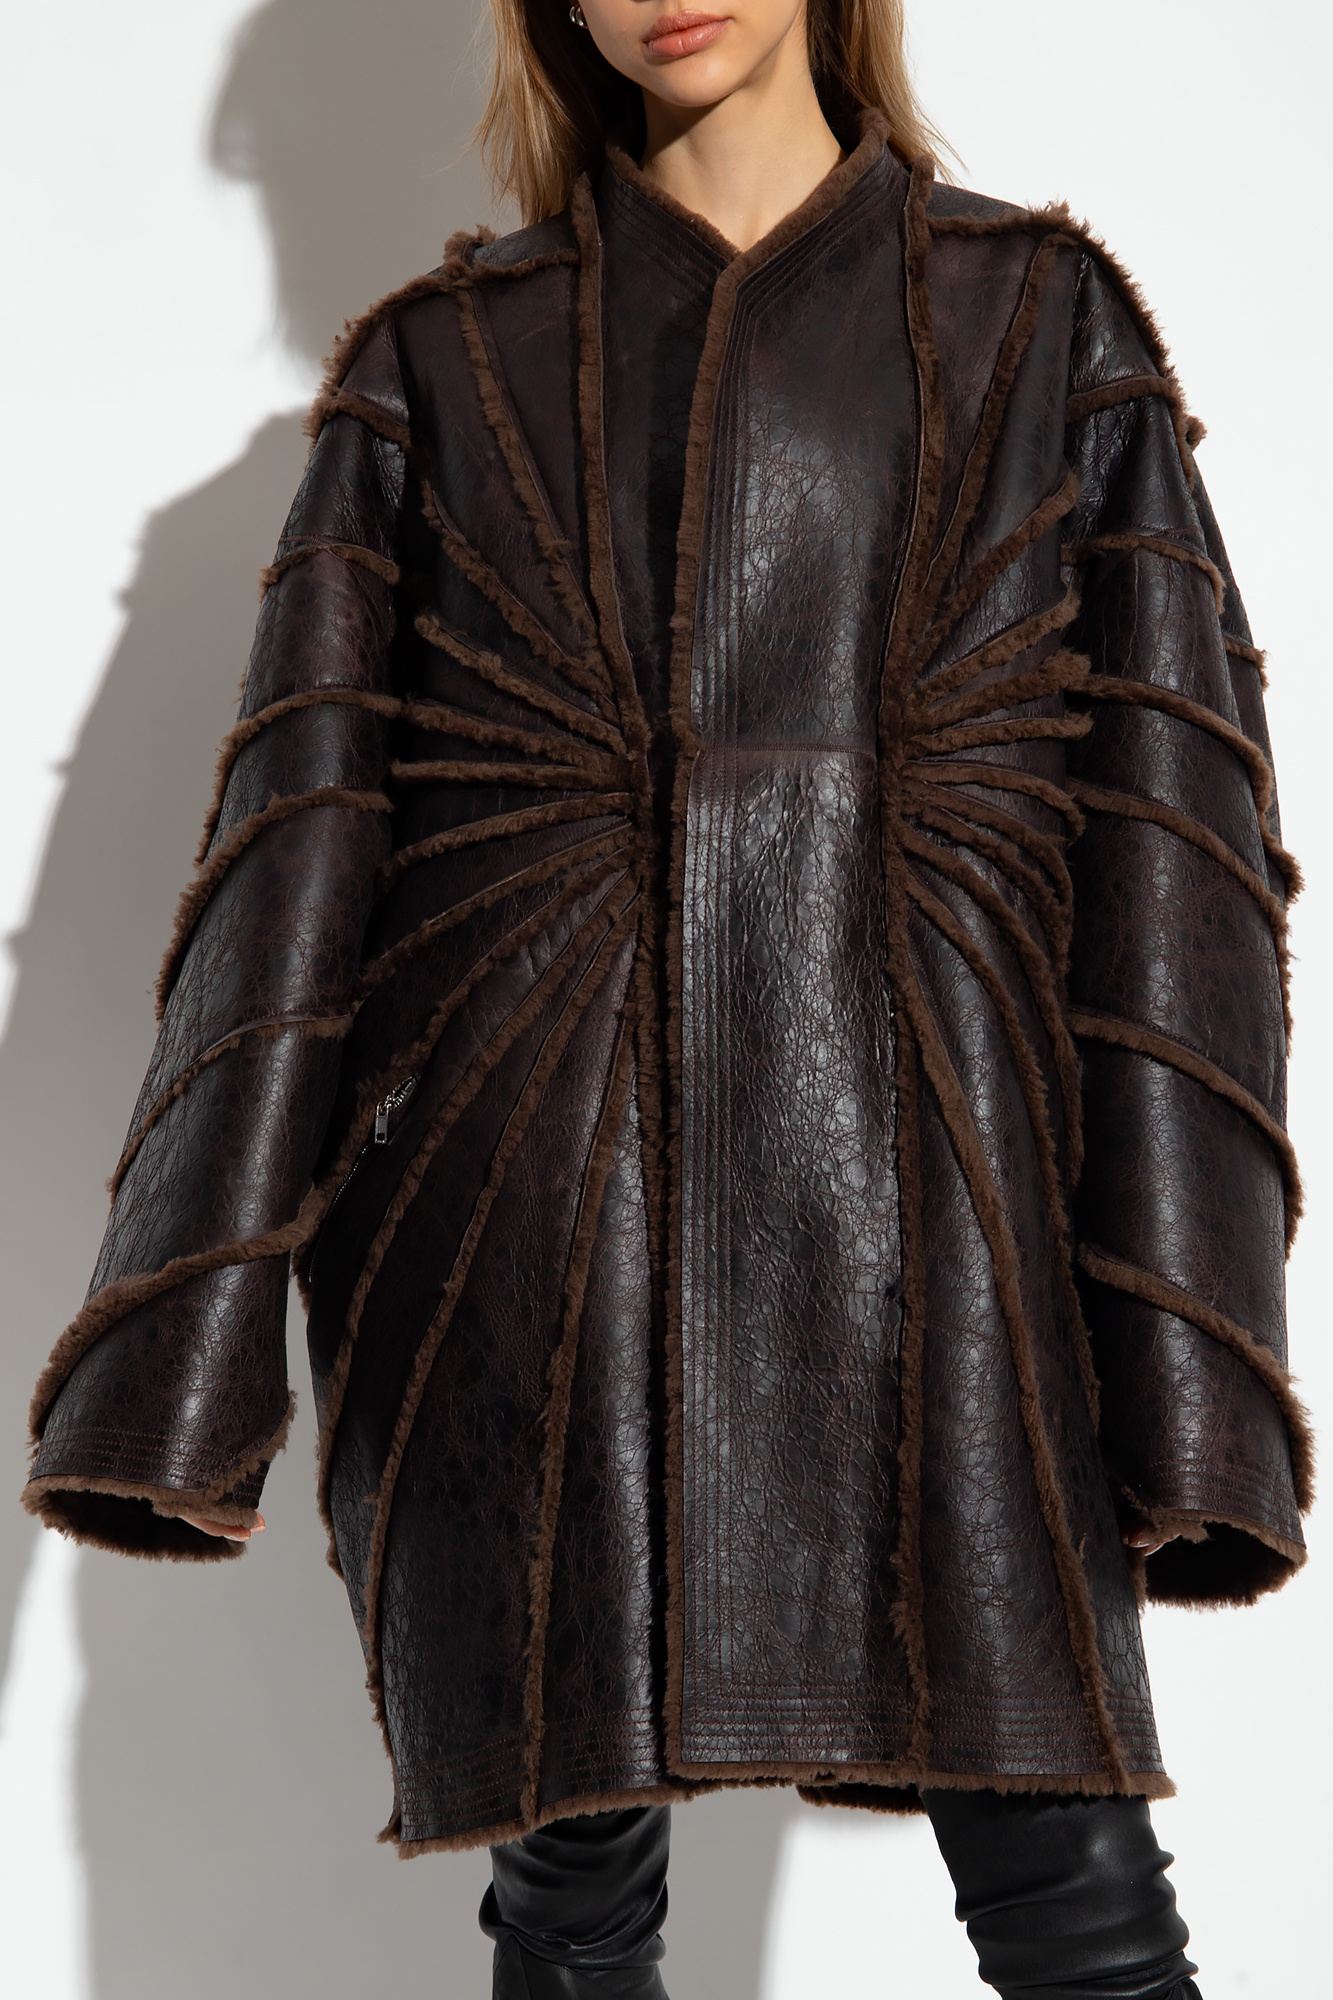 Rick Owens Coat from lamb leather